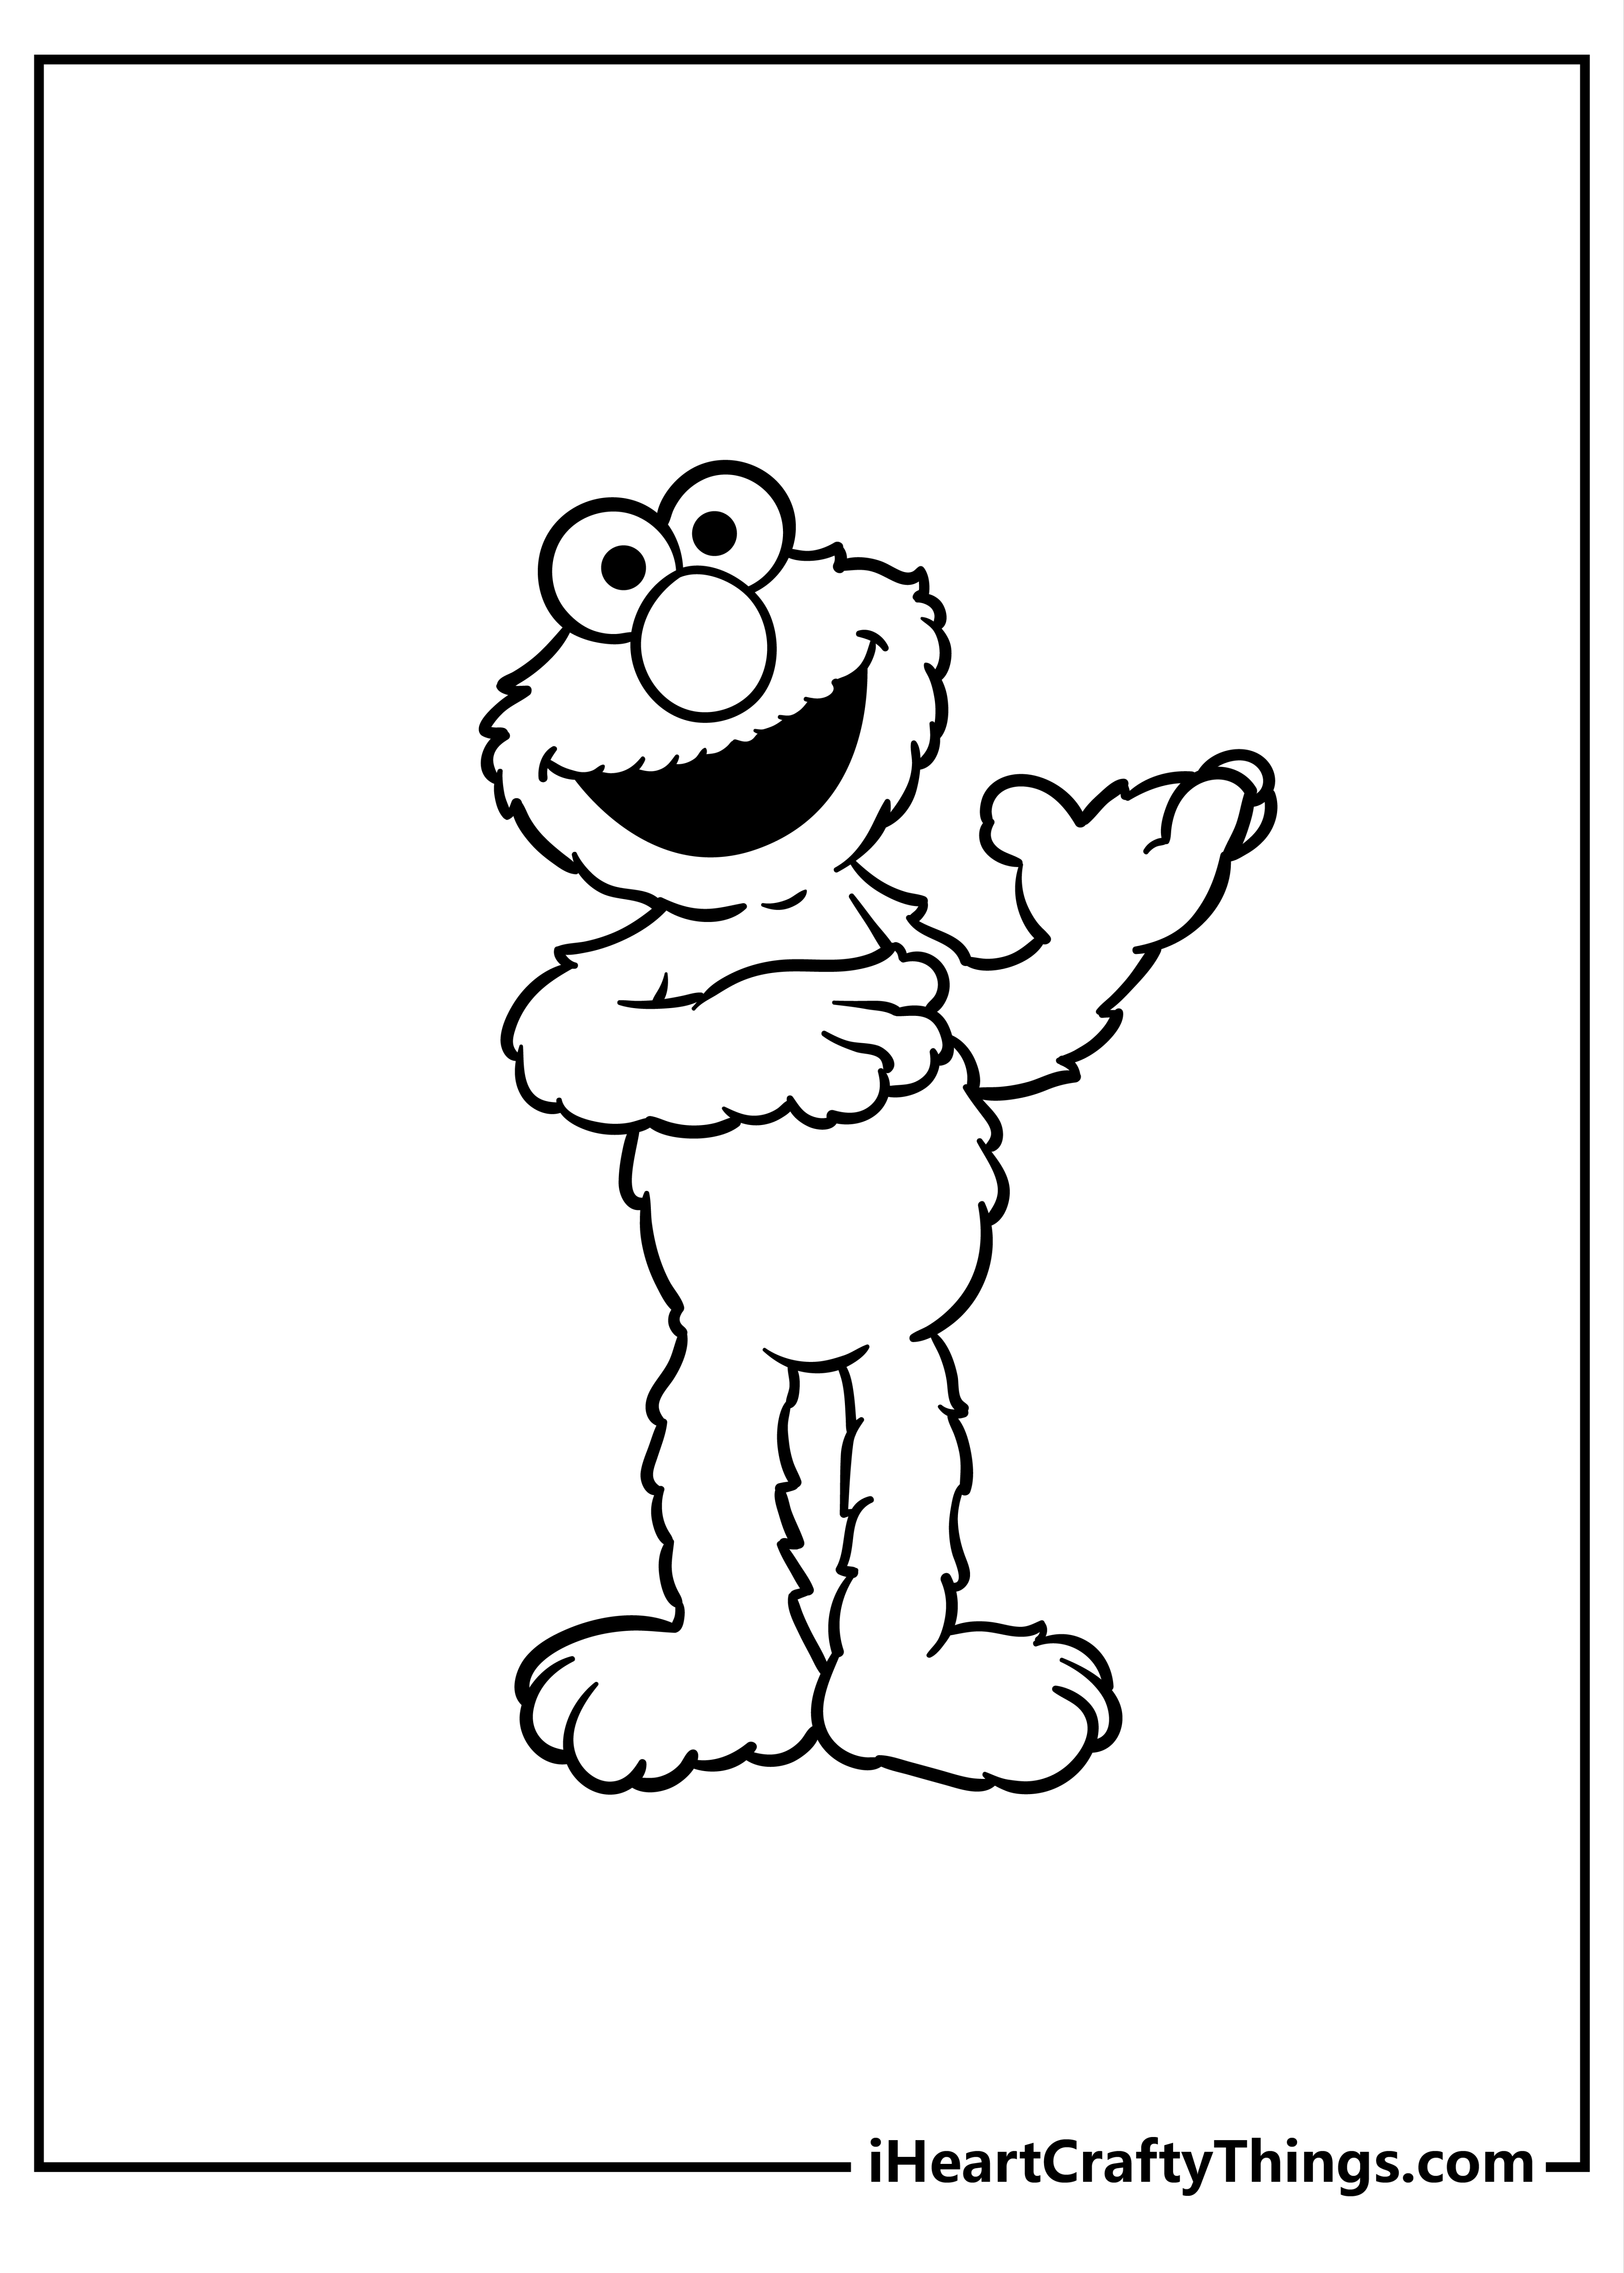 Printable Elmo Coloring Pages (Updated )